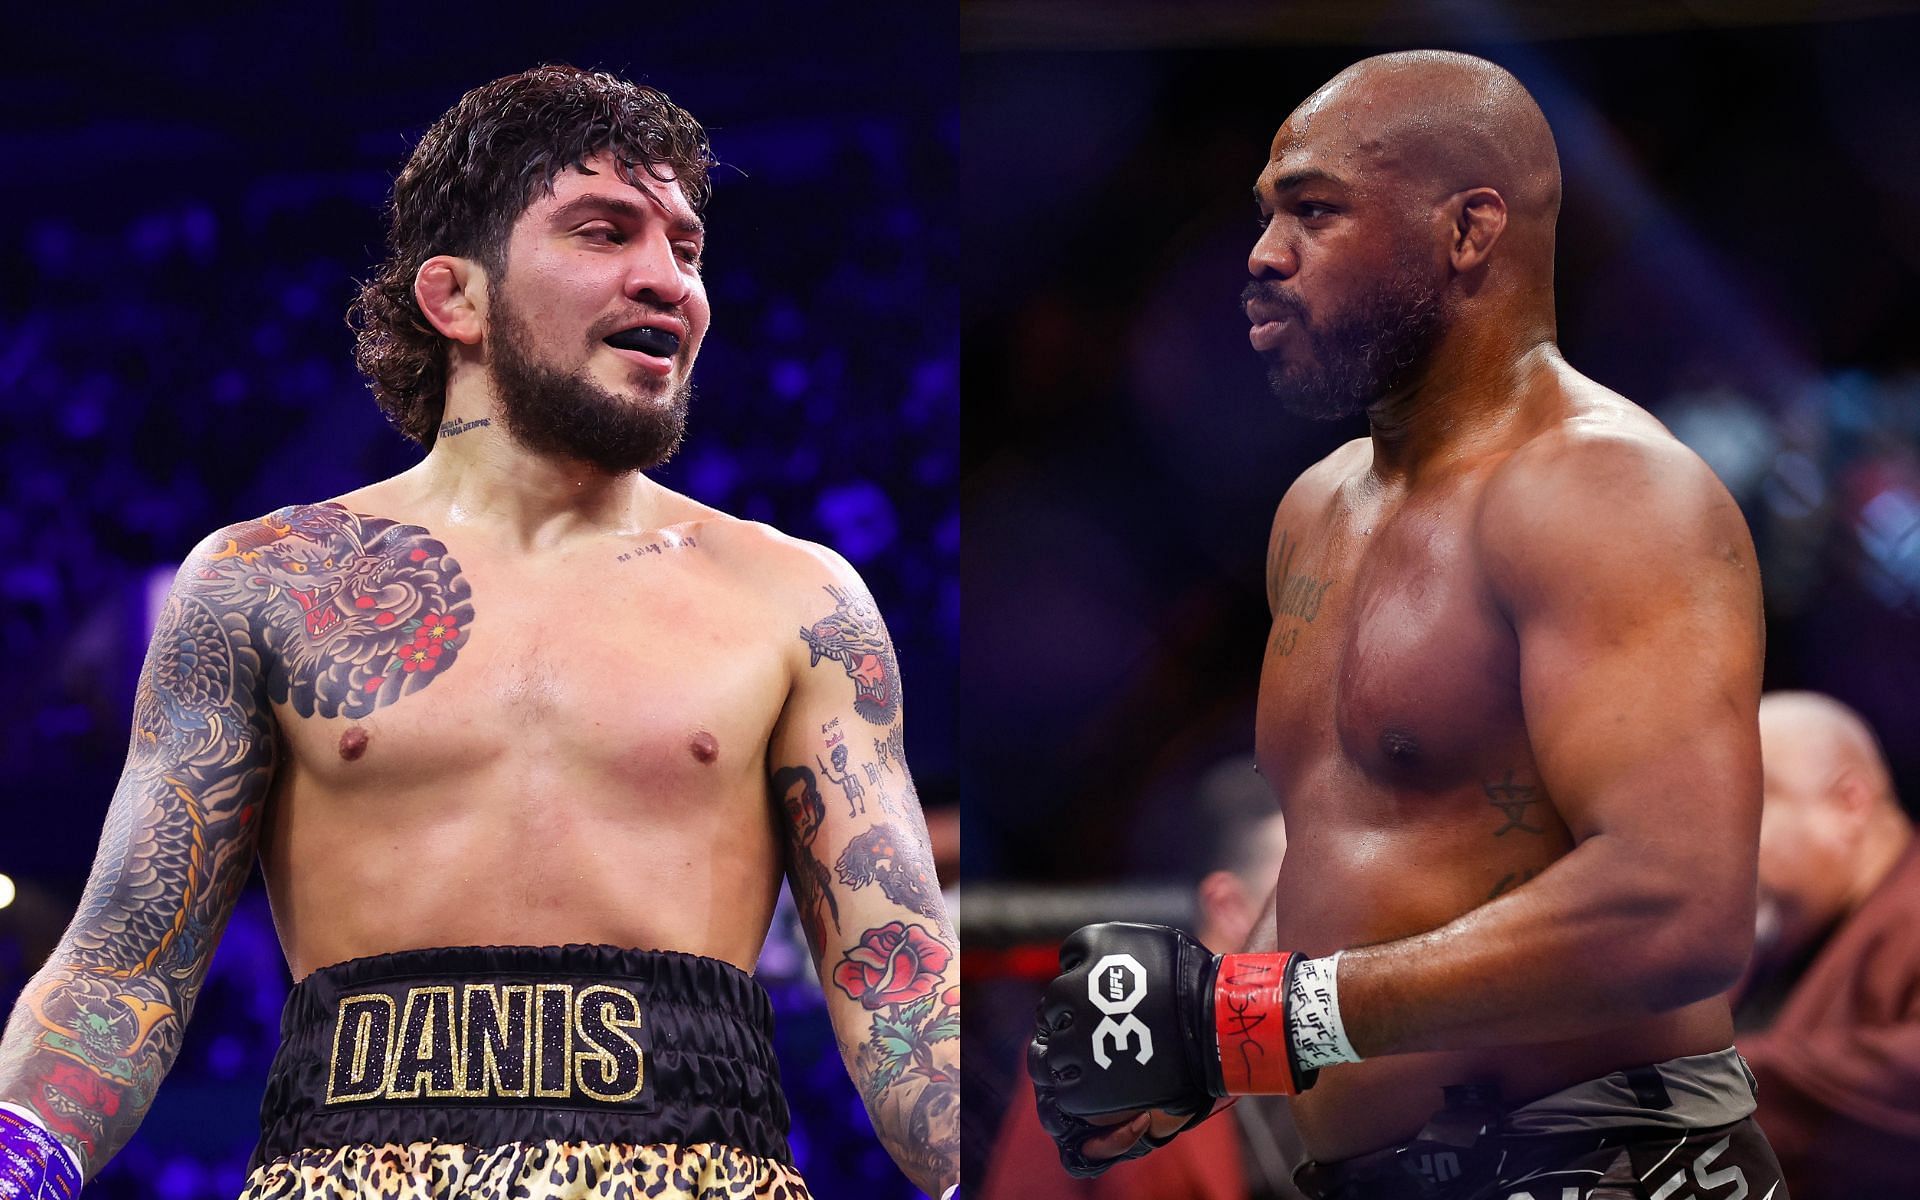 Dillon Danis (left) has time and again expressed interest in facing Jon Jones (right) in an MMA fight [Images courtesy: Getty Images]